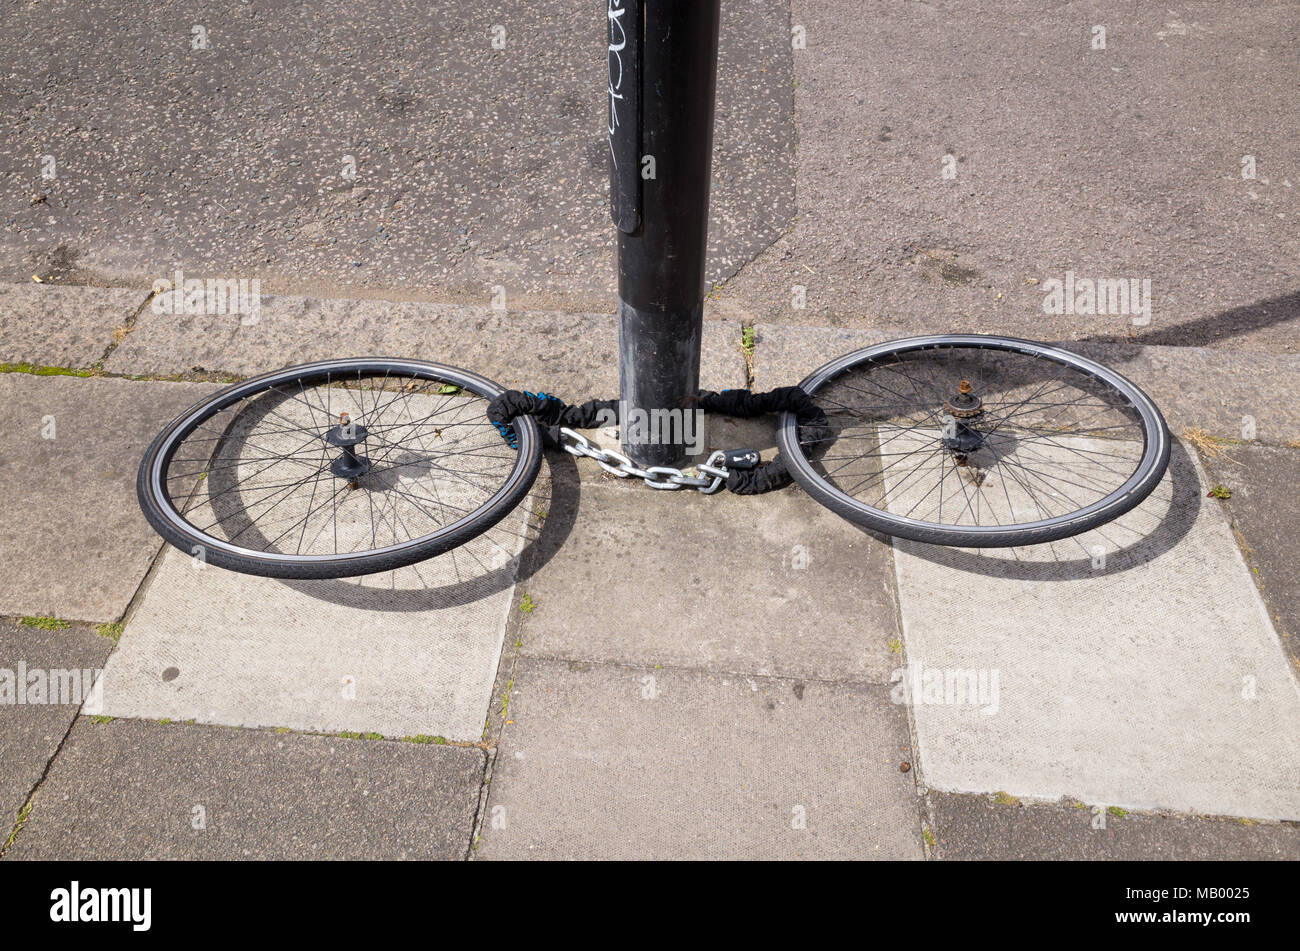 Stolen bicycle with wheels left chained to a post, UK, London Stock Photo -  Alamy